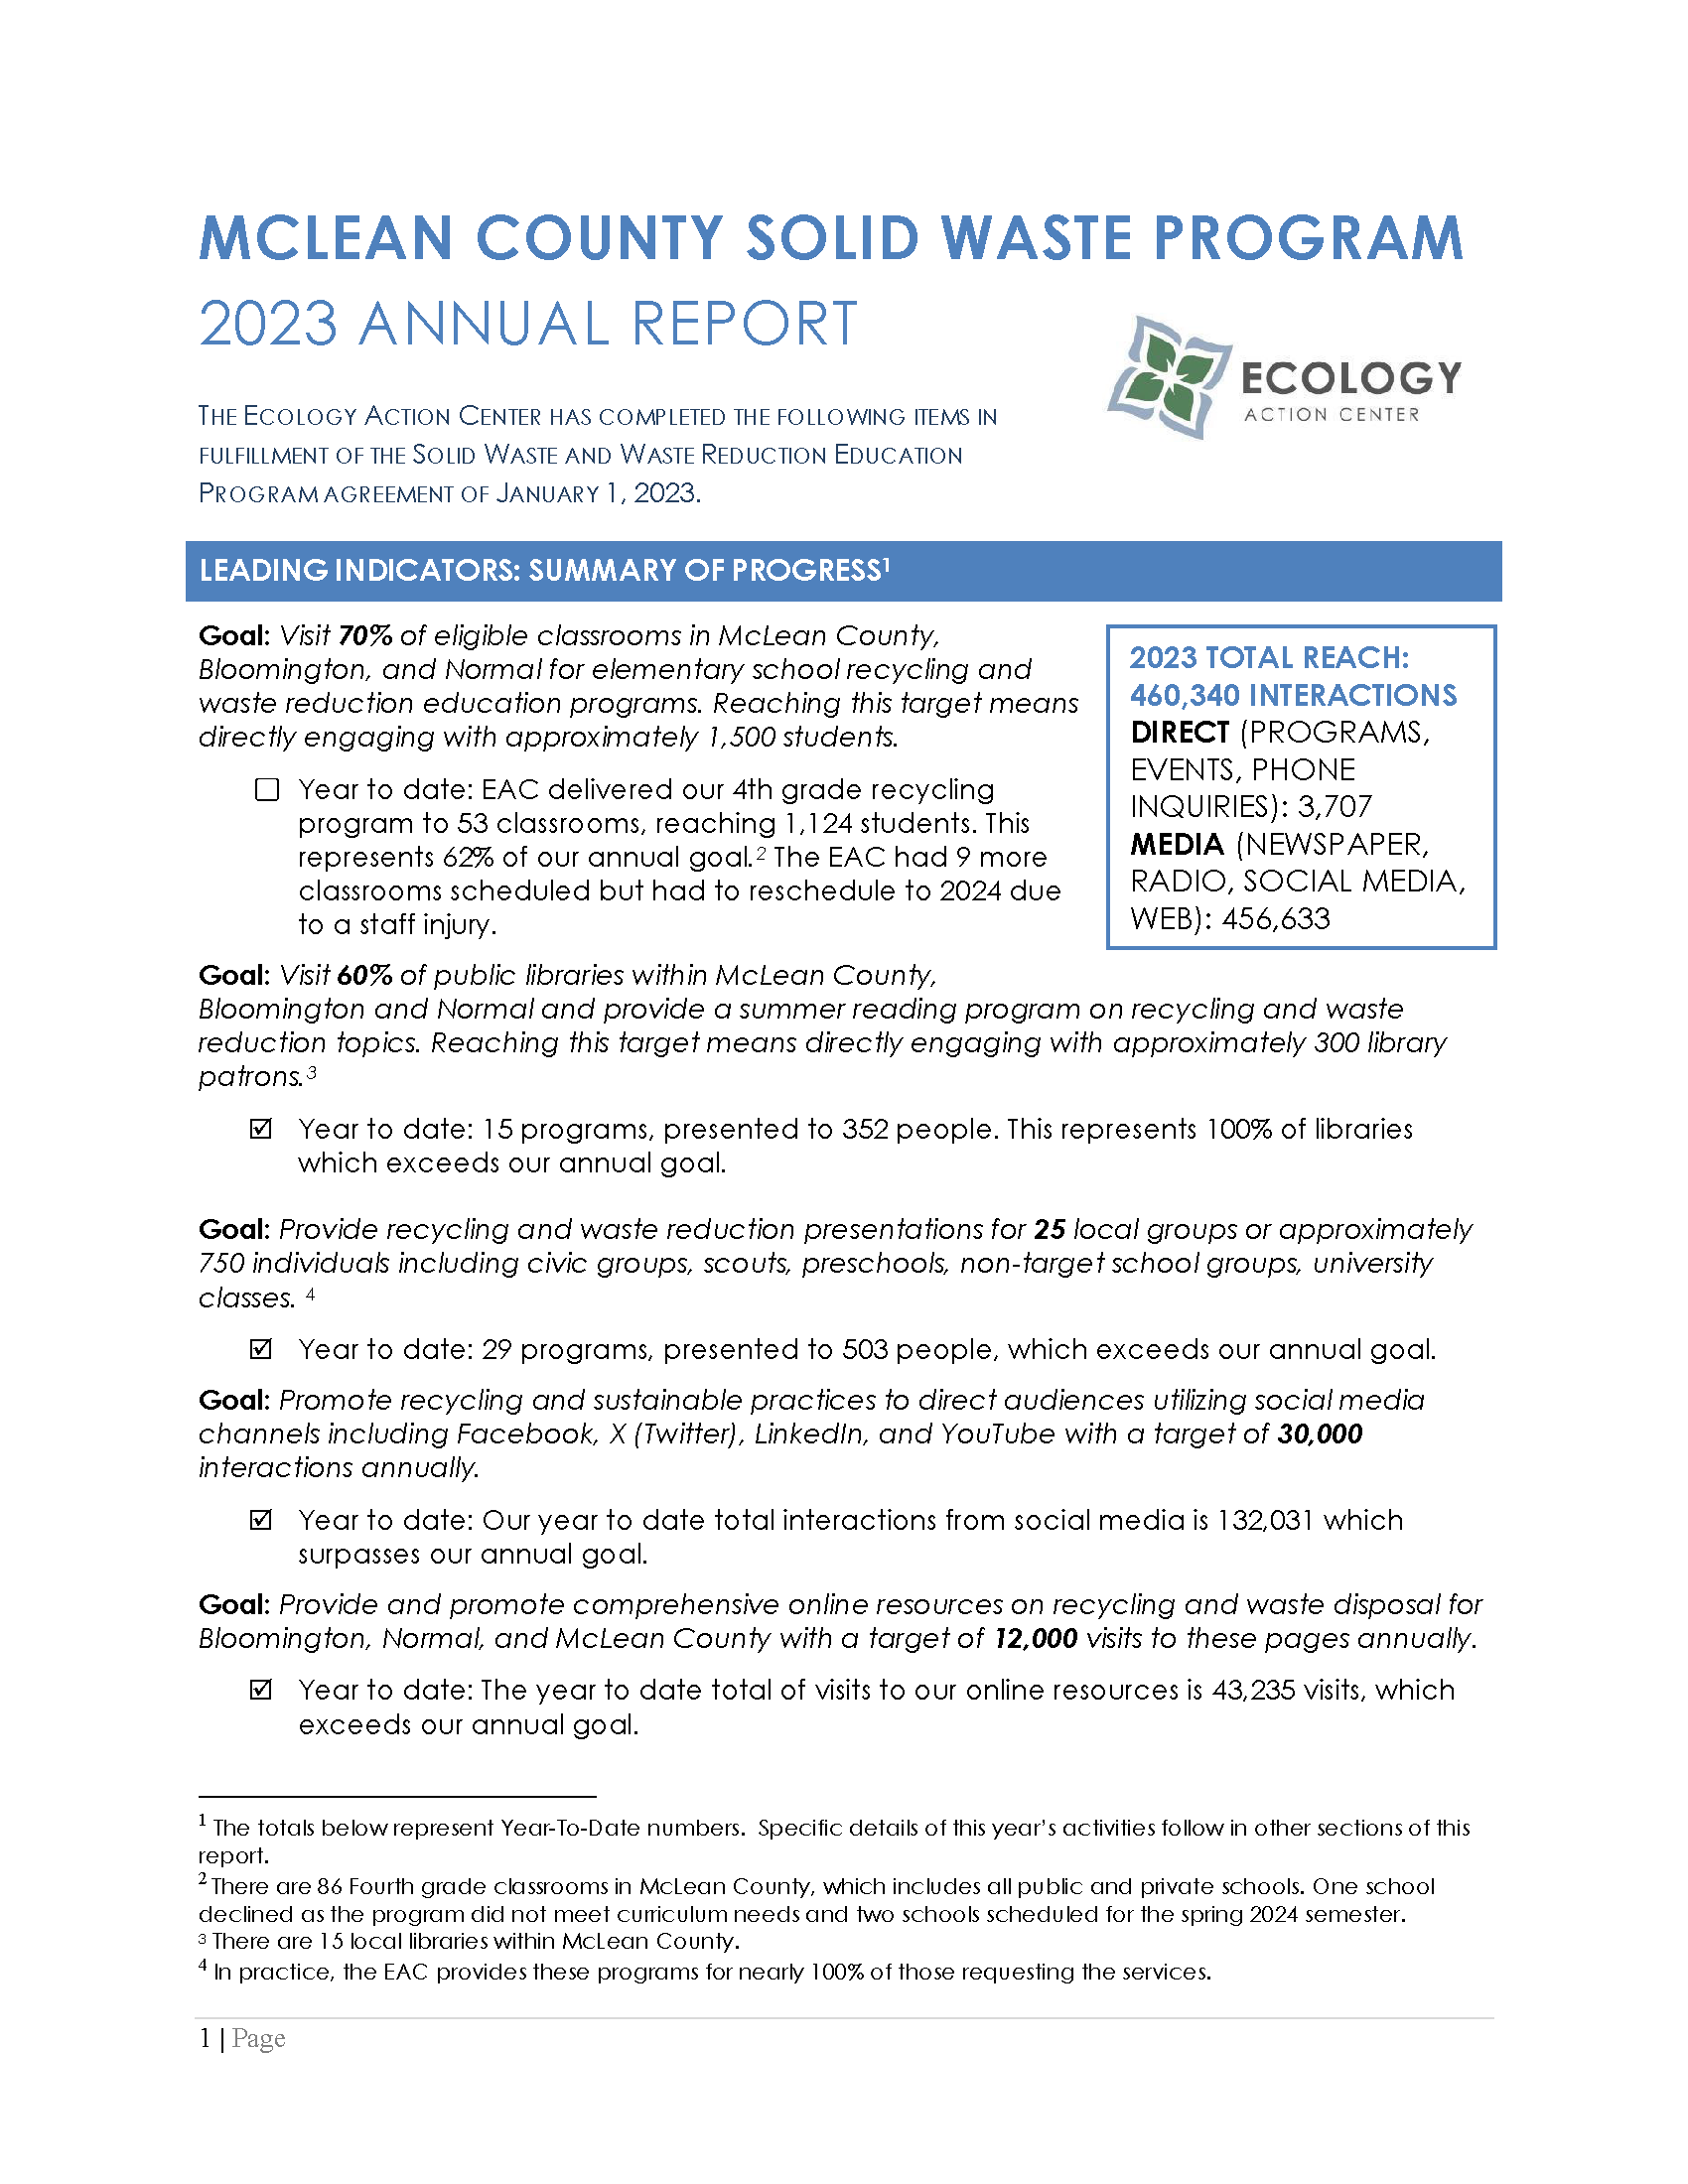 First page of the 2023 solid waste report